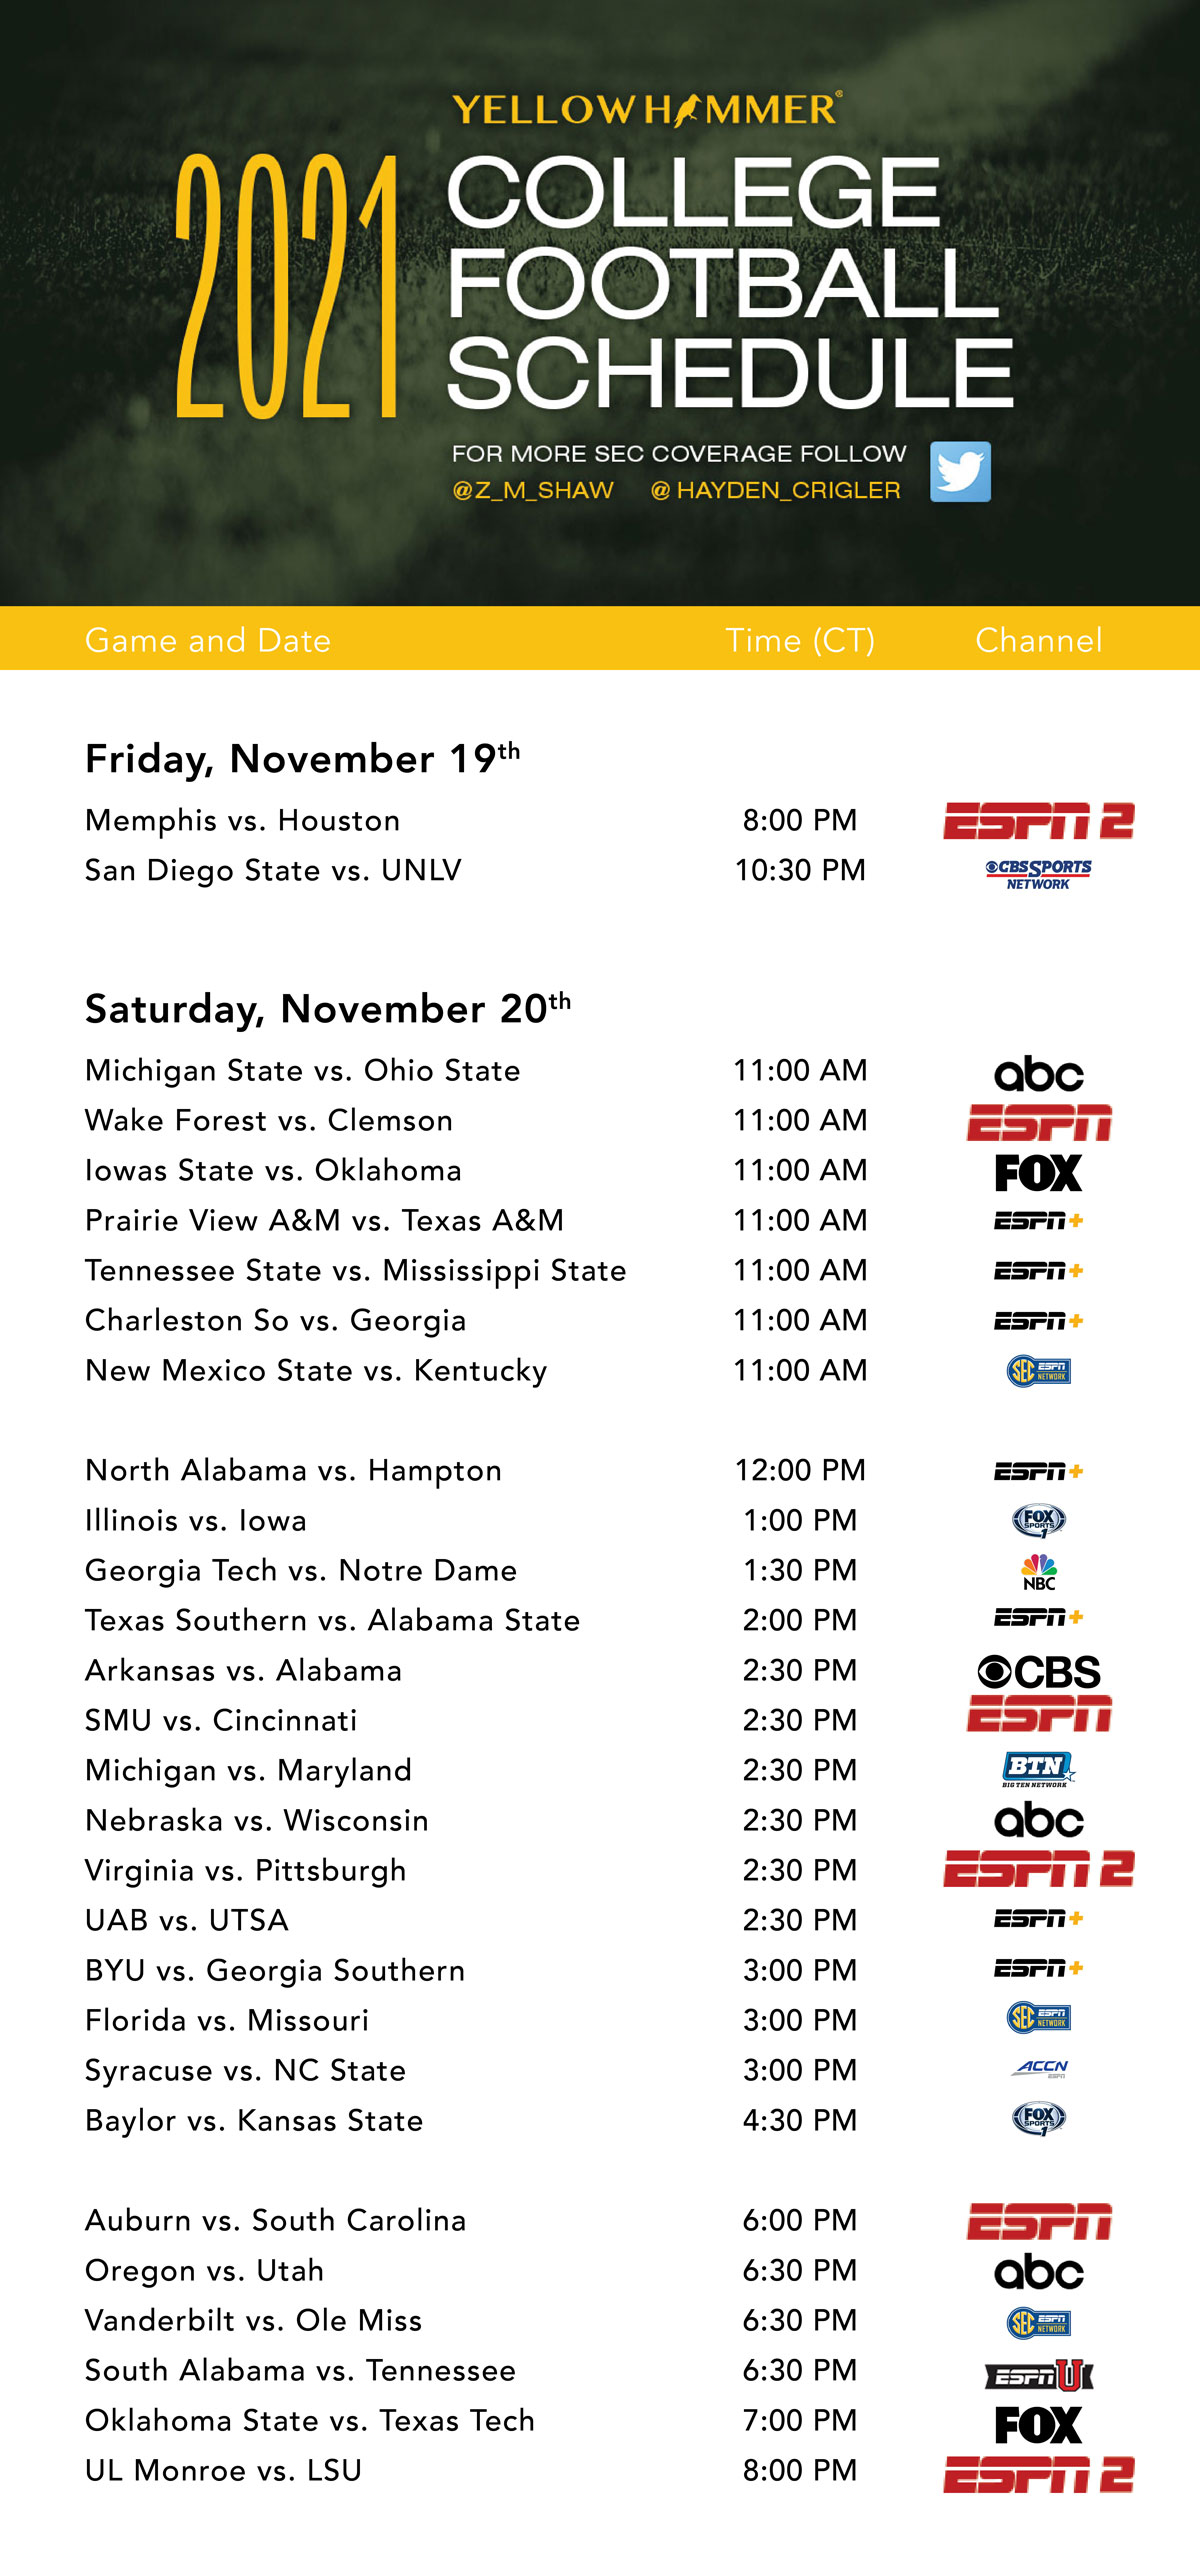 College football TV schedule and times